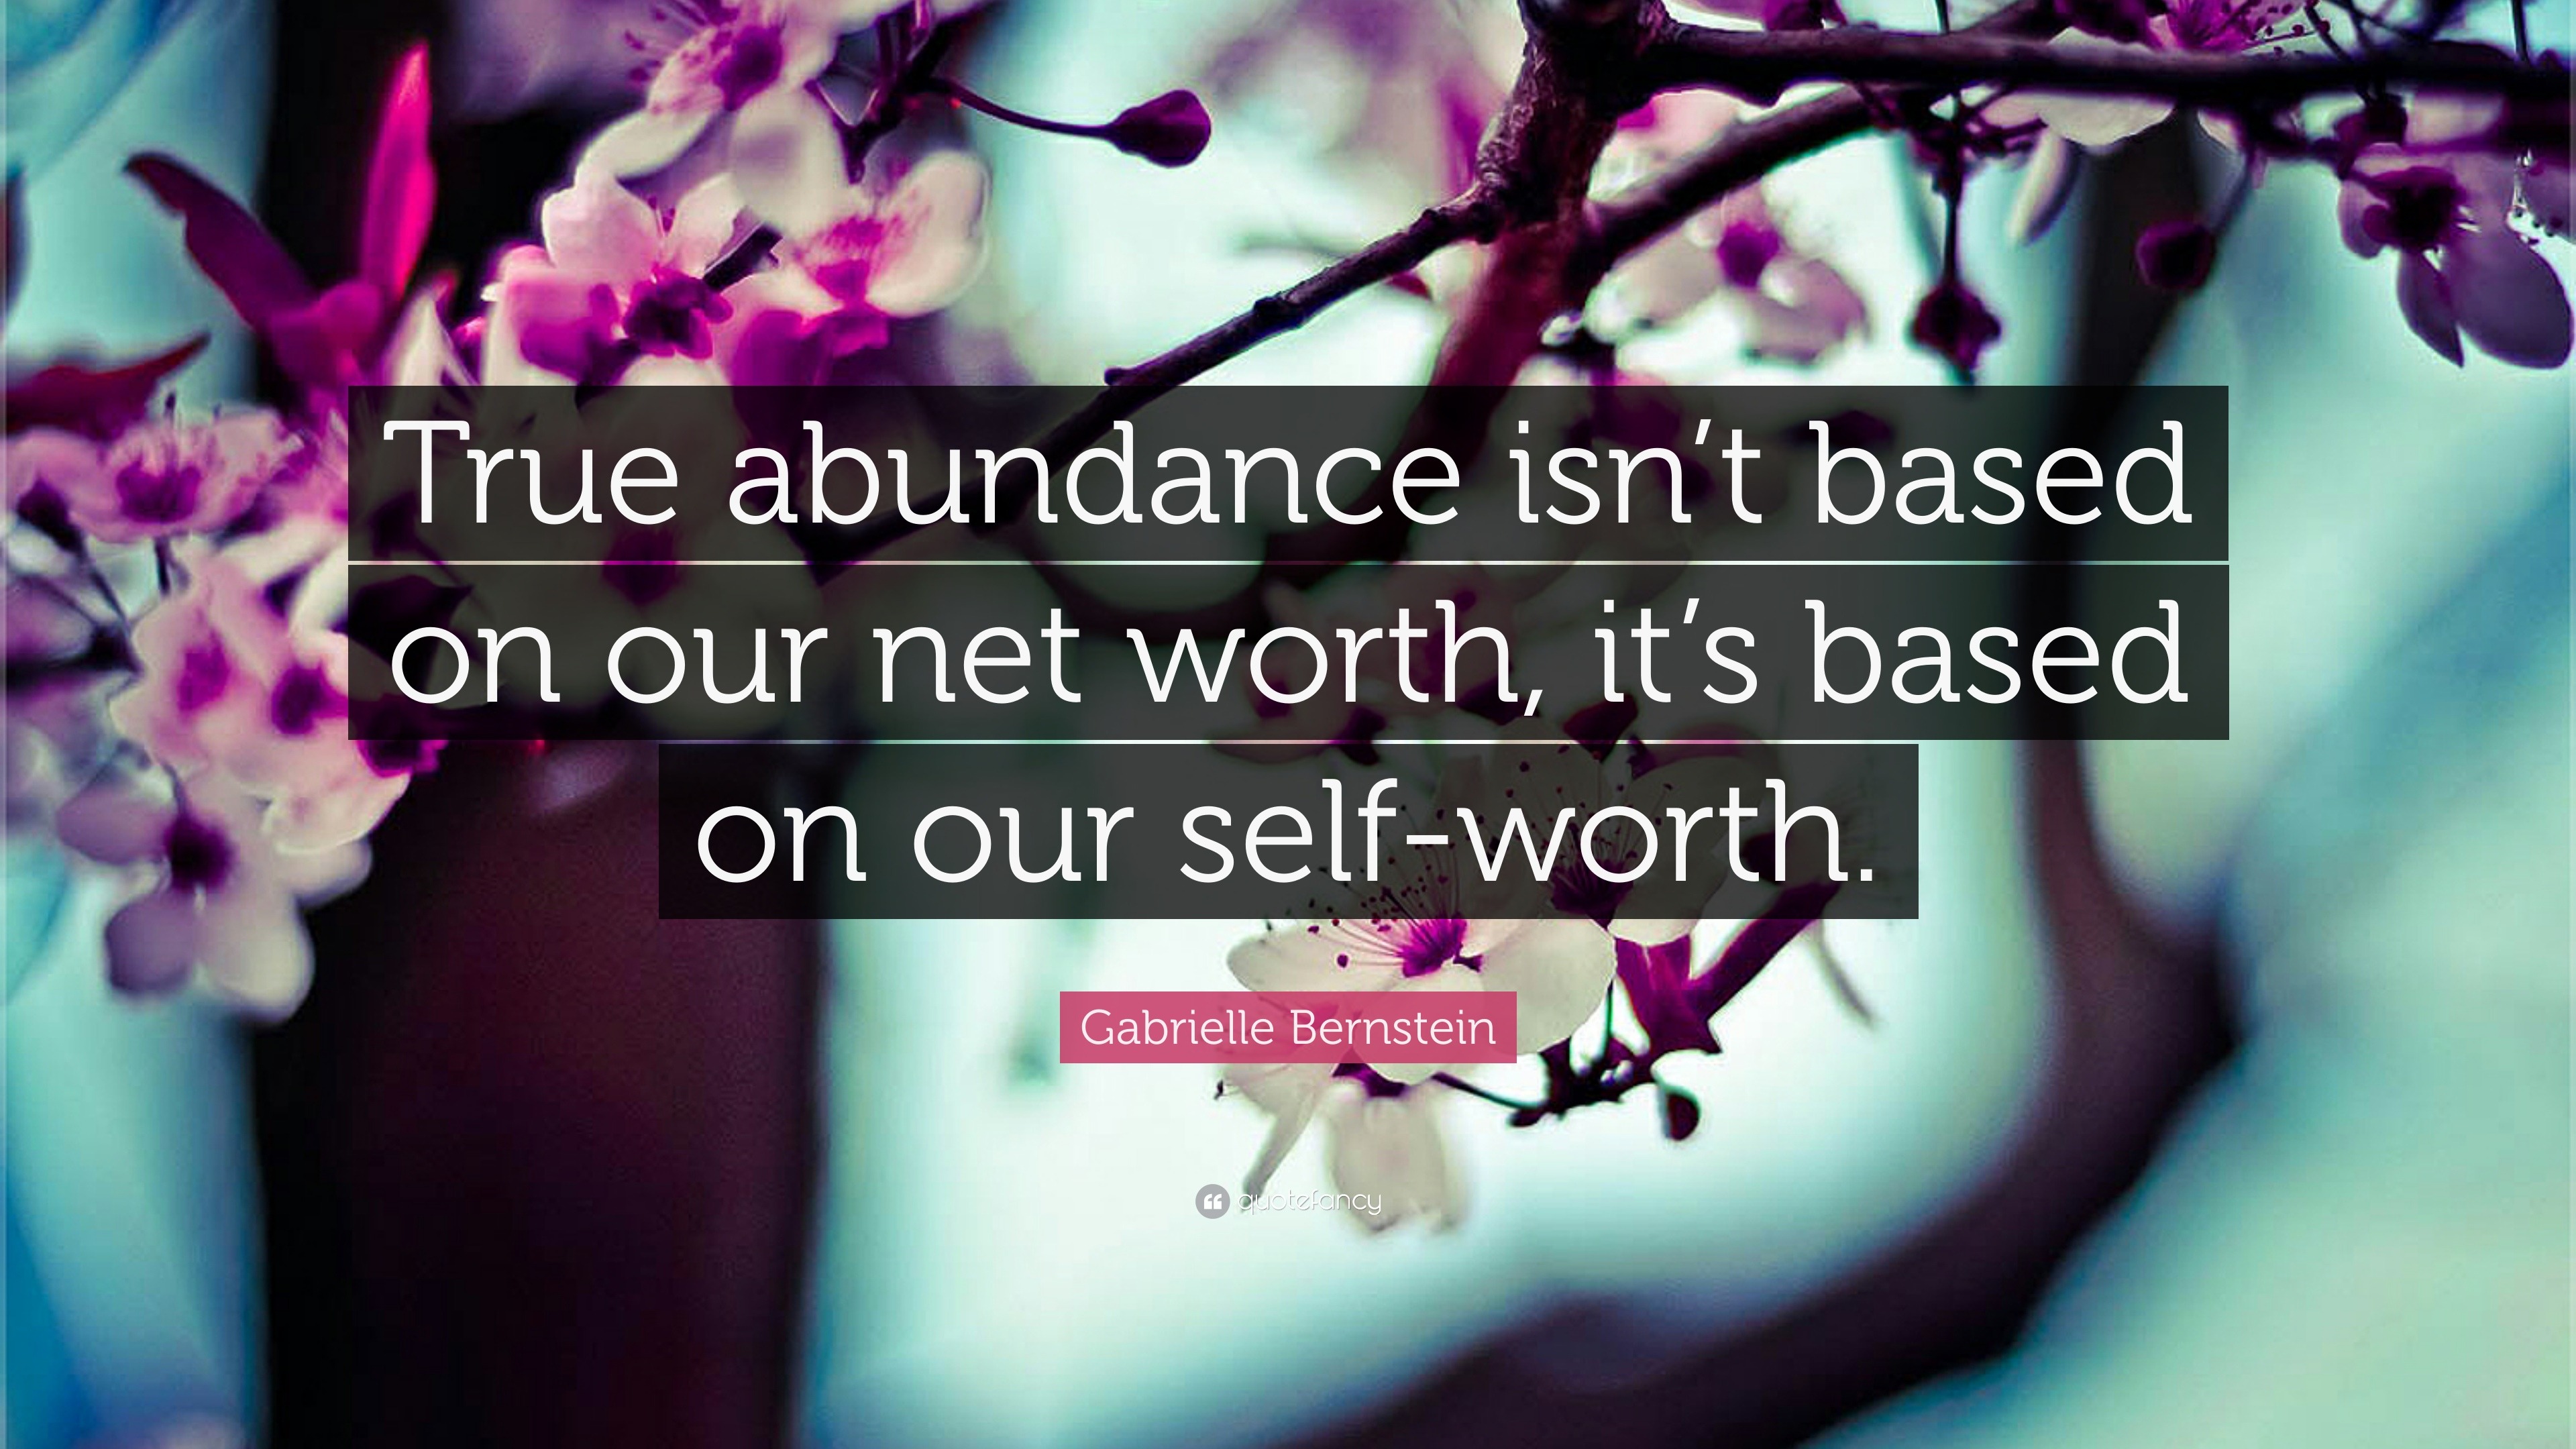 50 Gabrielle Bernstein Quotes To Attract What You Want and Give